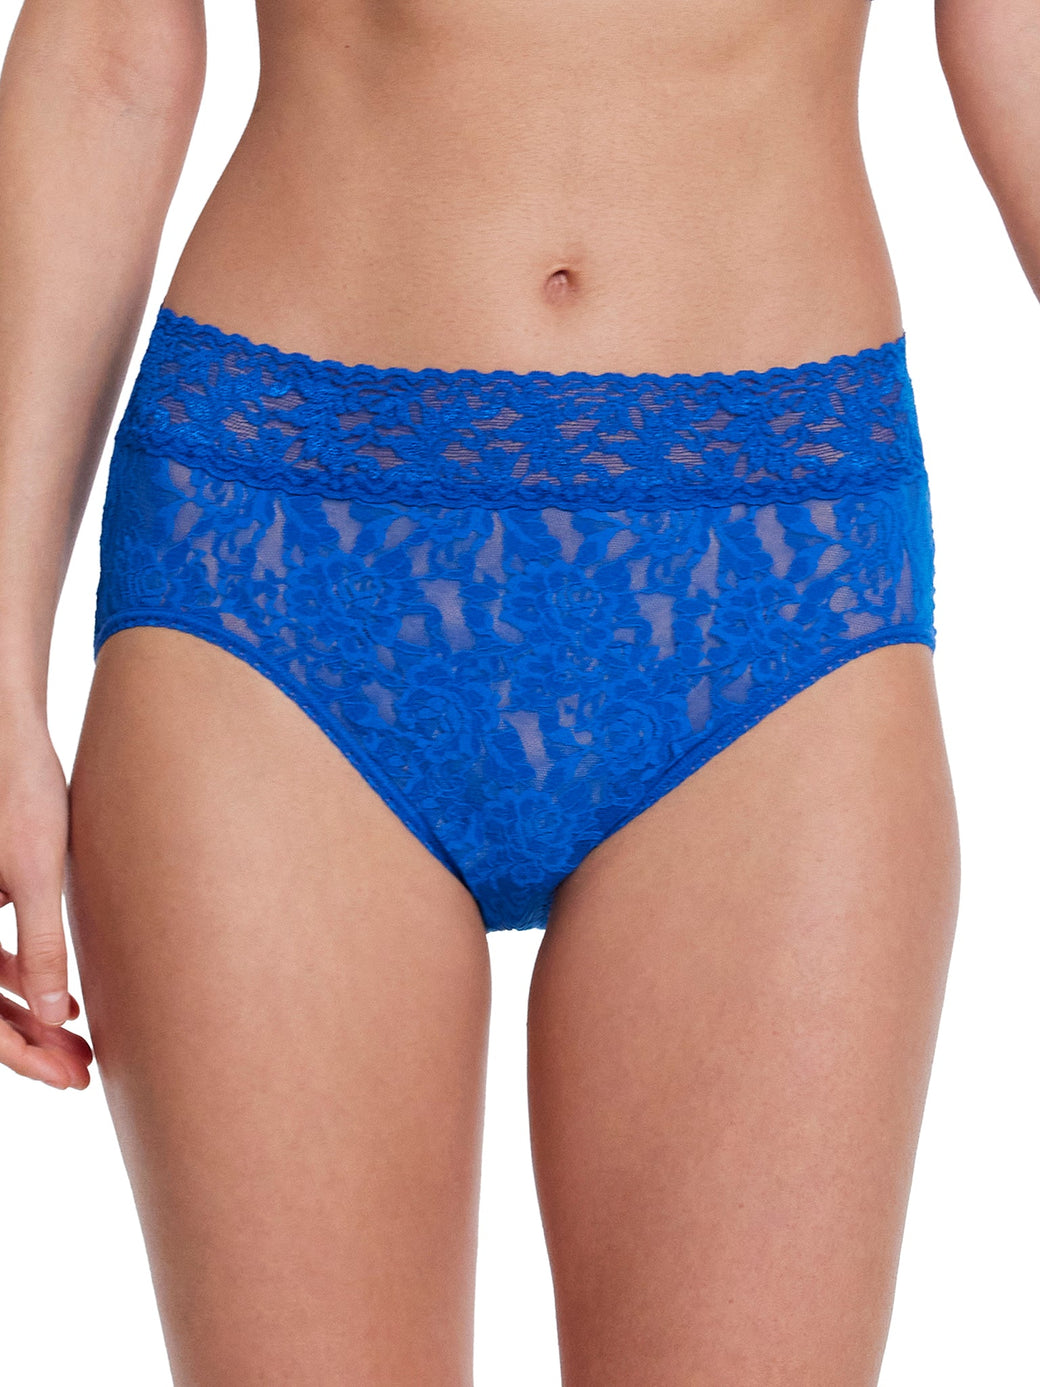 Signature Lace French Brief Deep Dive Blue